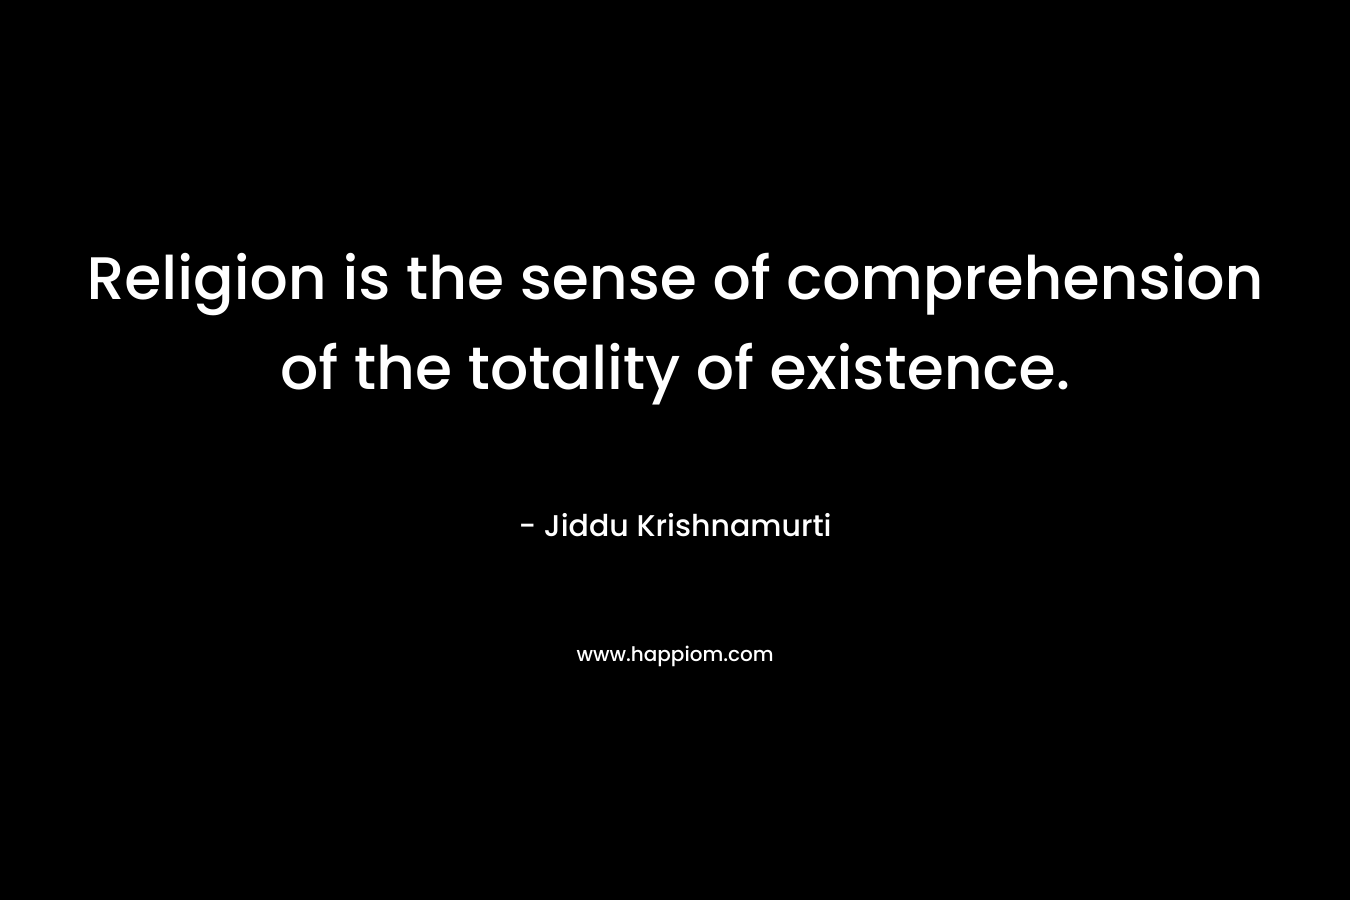 Religion is the sense of comprehension of the totality of existence.